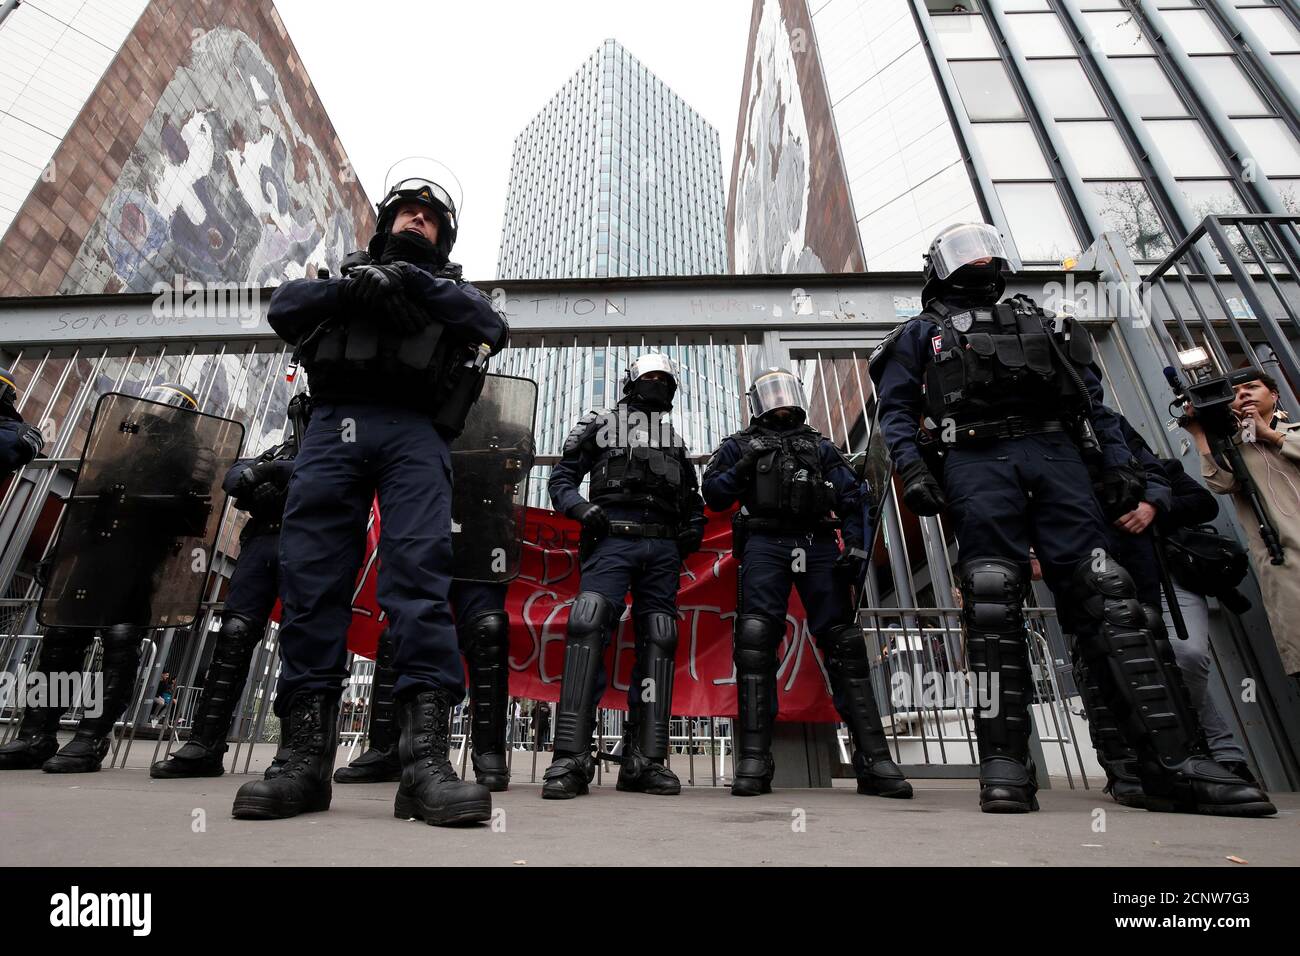 French CRS riot police secure the gate of the Jussieu campus in Paris during a protestation against Macron's university reform in Paris, France, April 10, 2018. REUTERS/Benoit Tessier Stock Photo